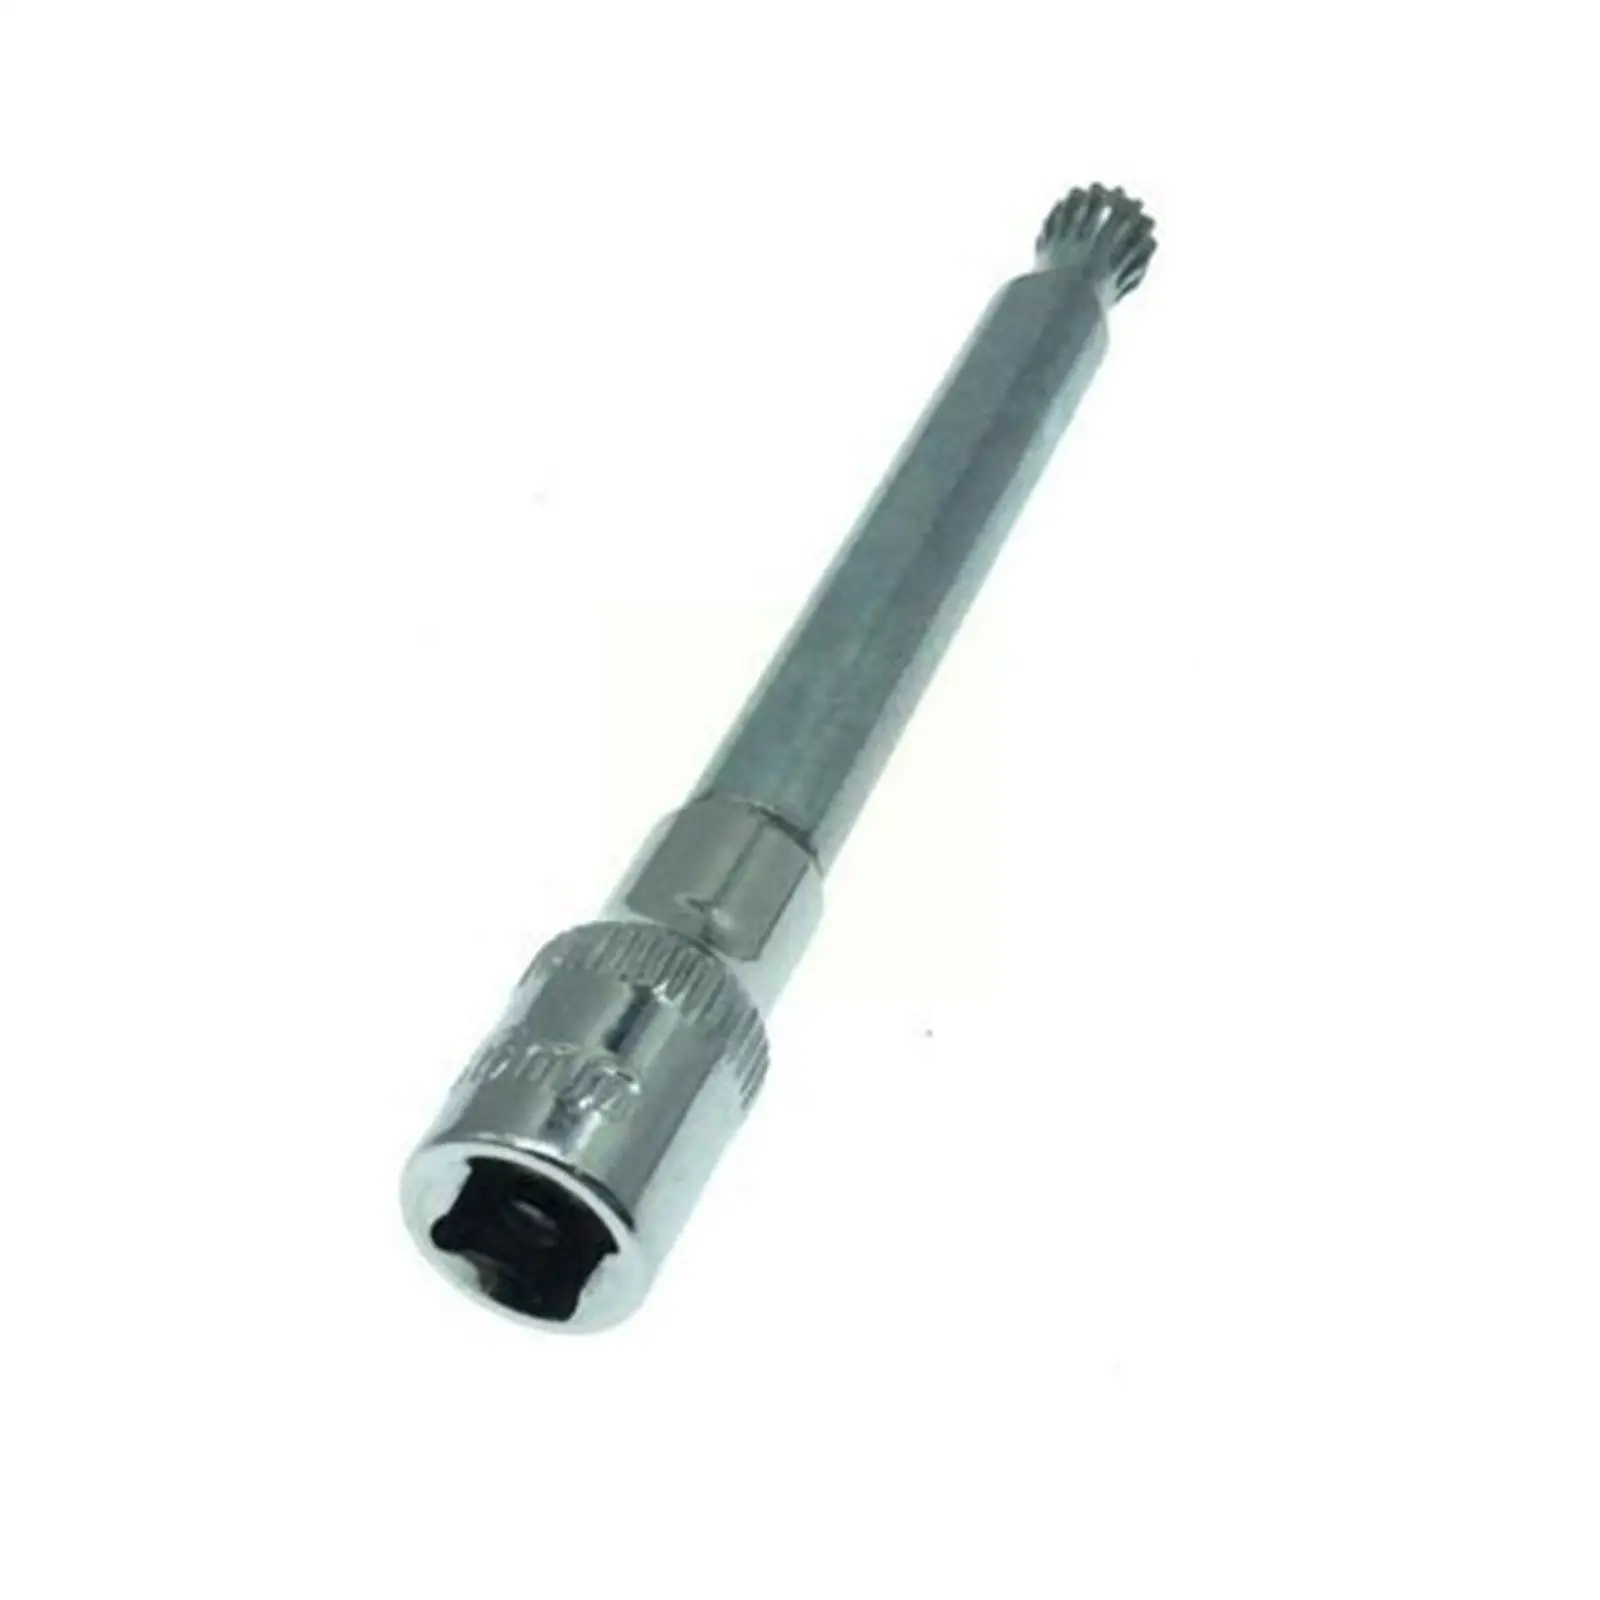 

DSG Gearbox Clutch Motor Electromechanical Unit Unlocking Tool 14T Clutch Release Tool for FORD Geely Mercedes Chery P6O7